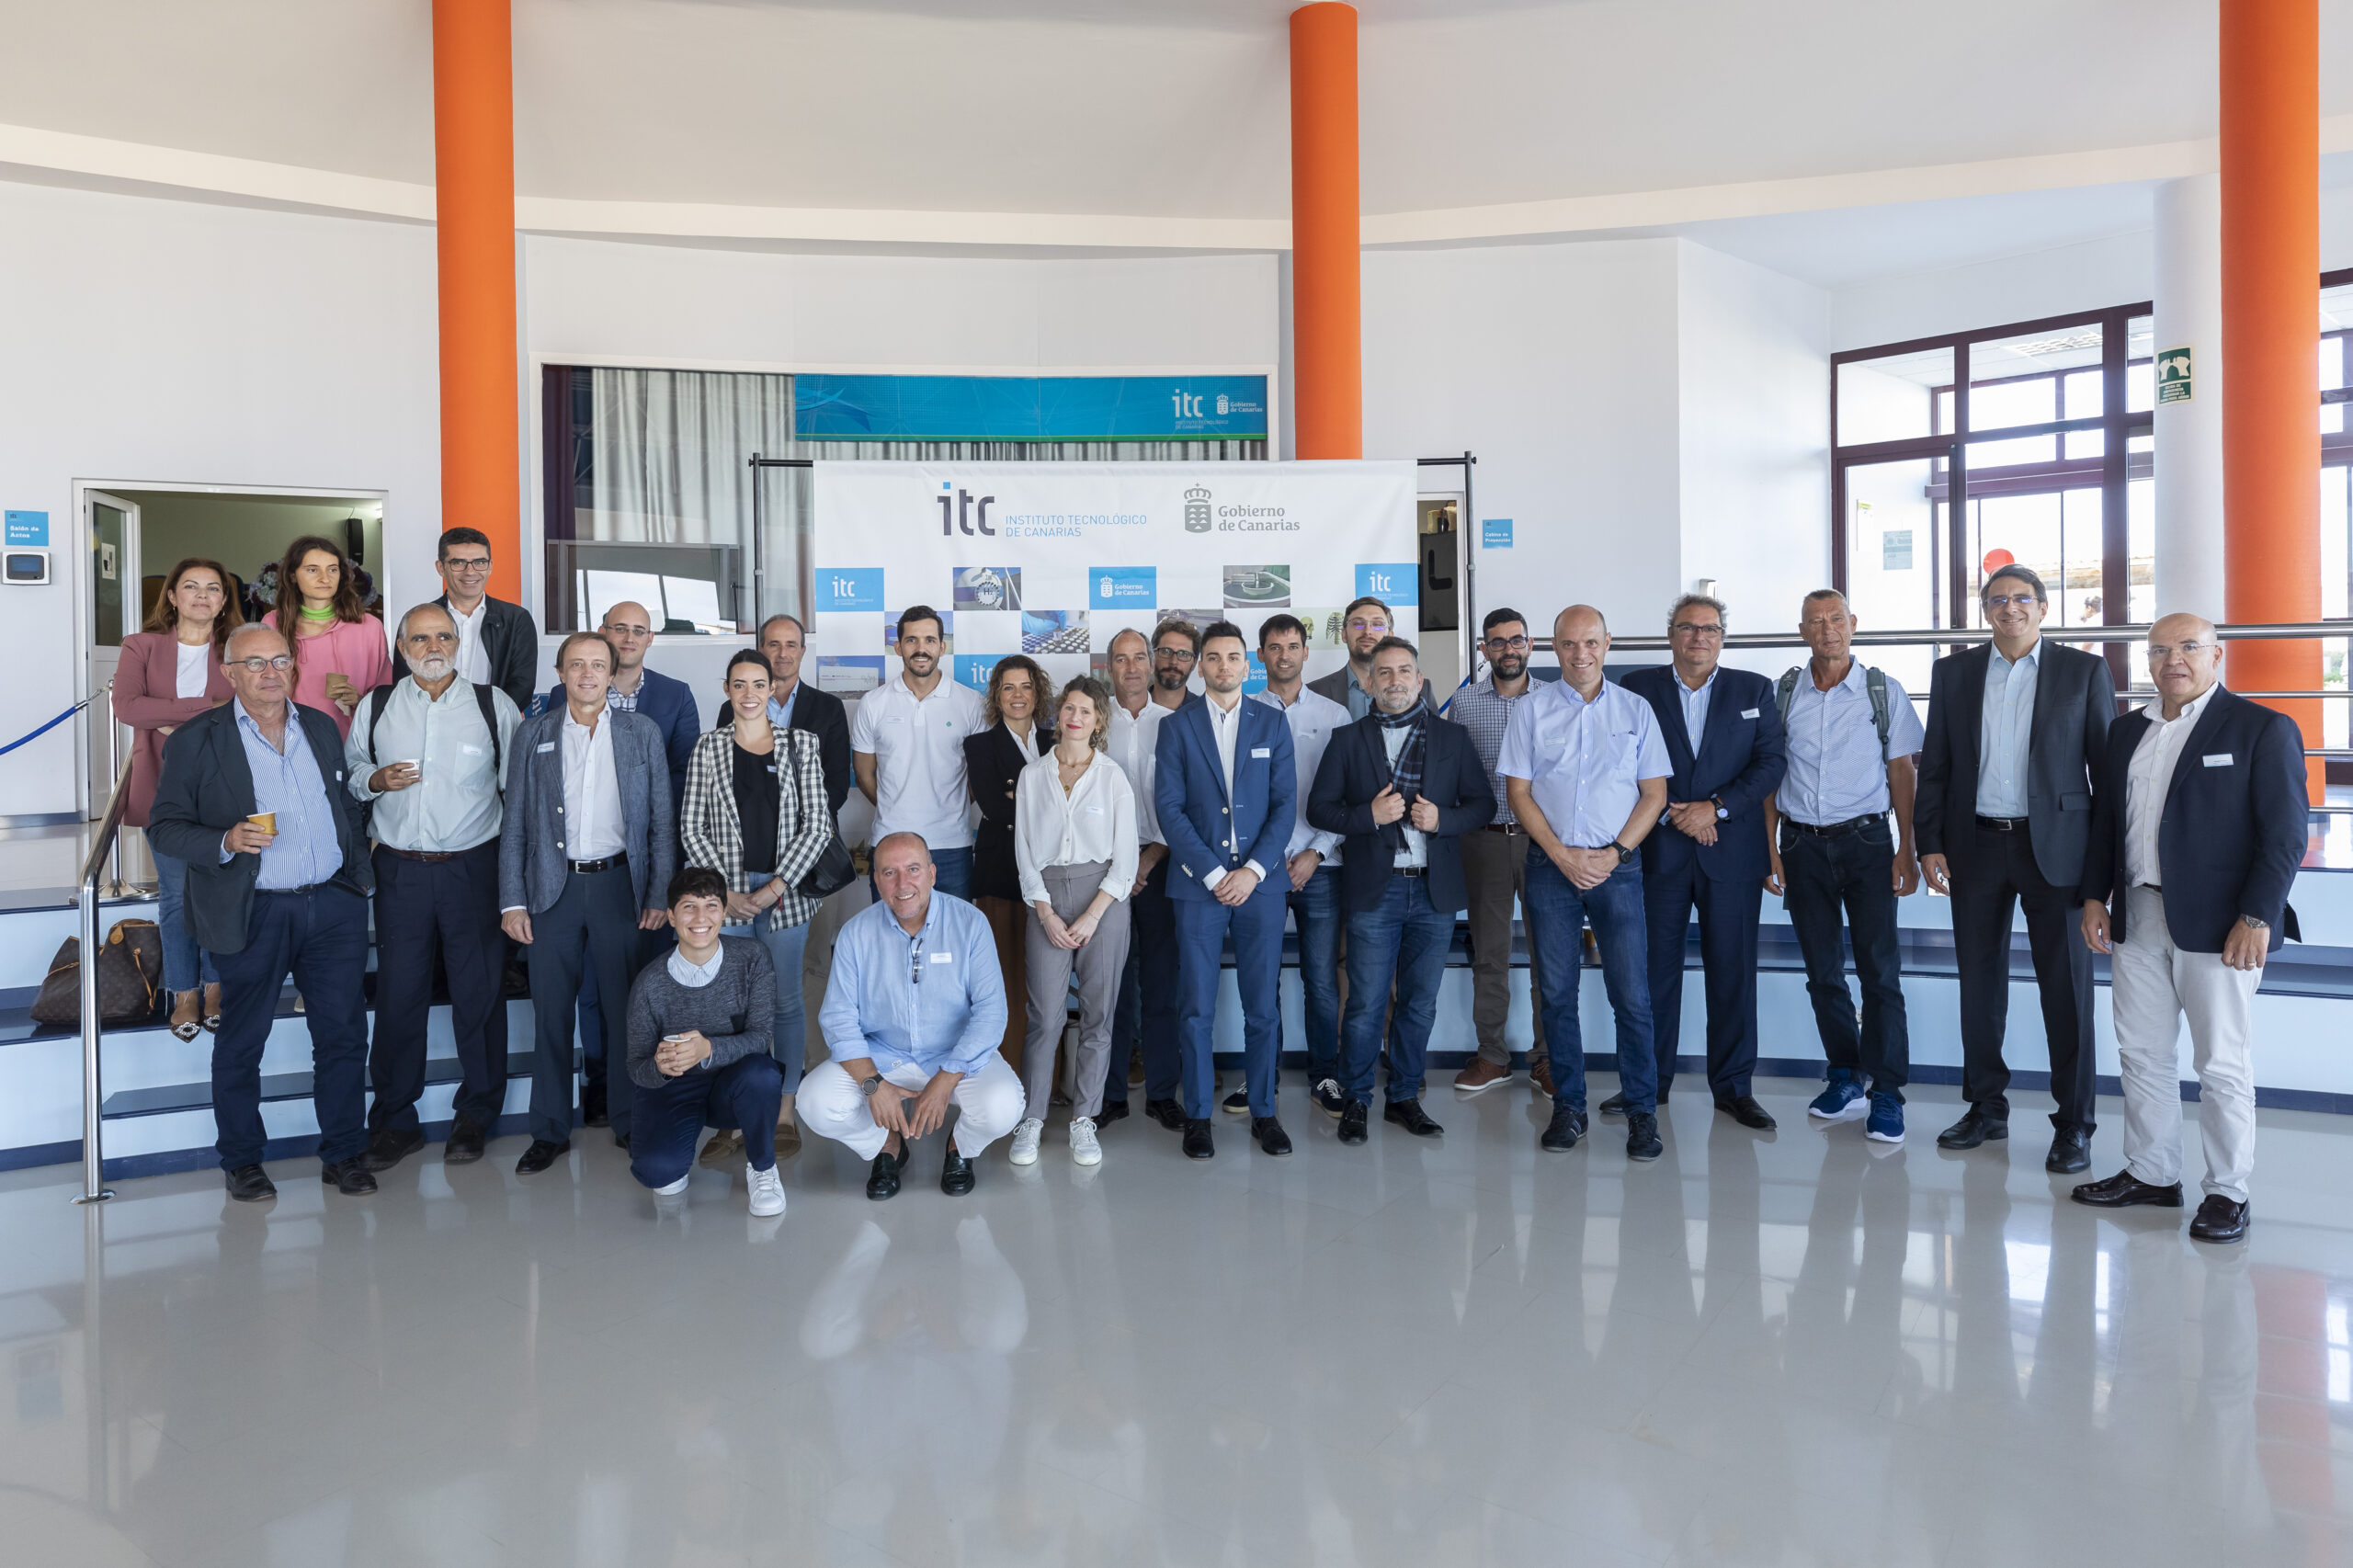 Green Hysland Workshop in Gran Canaria: Exchange on green hydrogen and island systems